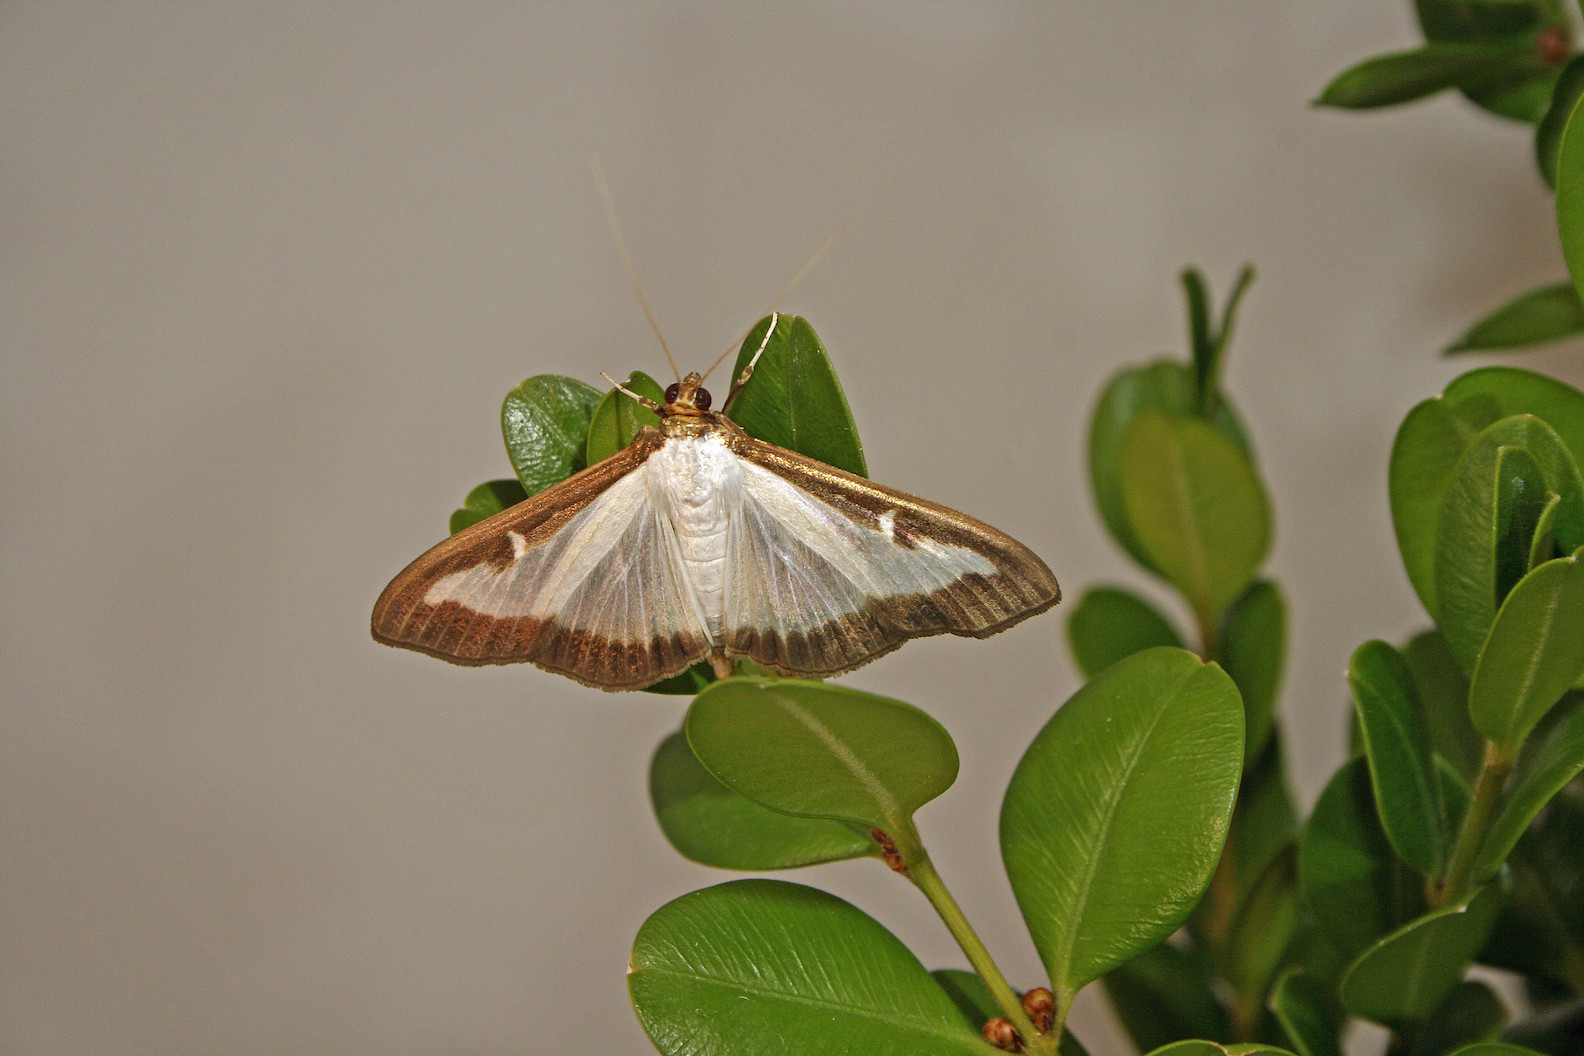 Adult box tree moths generally have white bodies with a brown head and abdomen tip. Their wings are white and slightly iridescent, with an irregular thick brown border, spanning 1.6 to 1.8 inches, at Forest Pest Methods Laboratory, Buzzards Bay, Massachusetts. (USDA photo by Hannah Nadel)